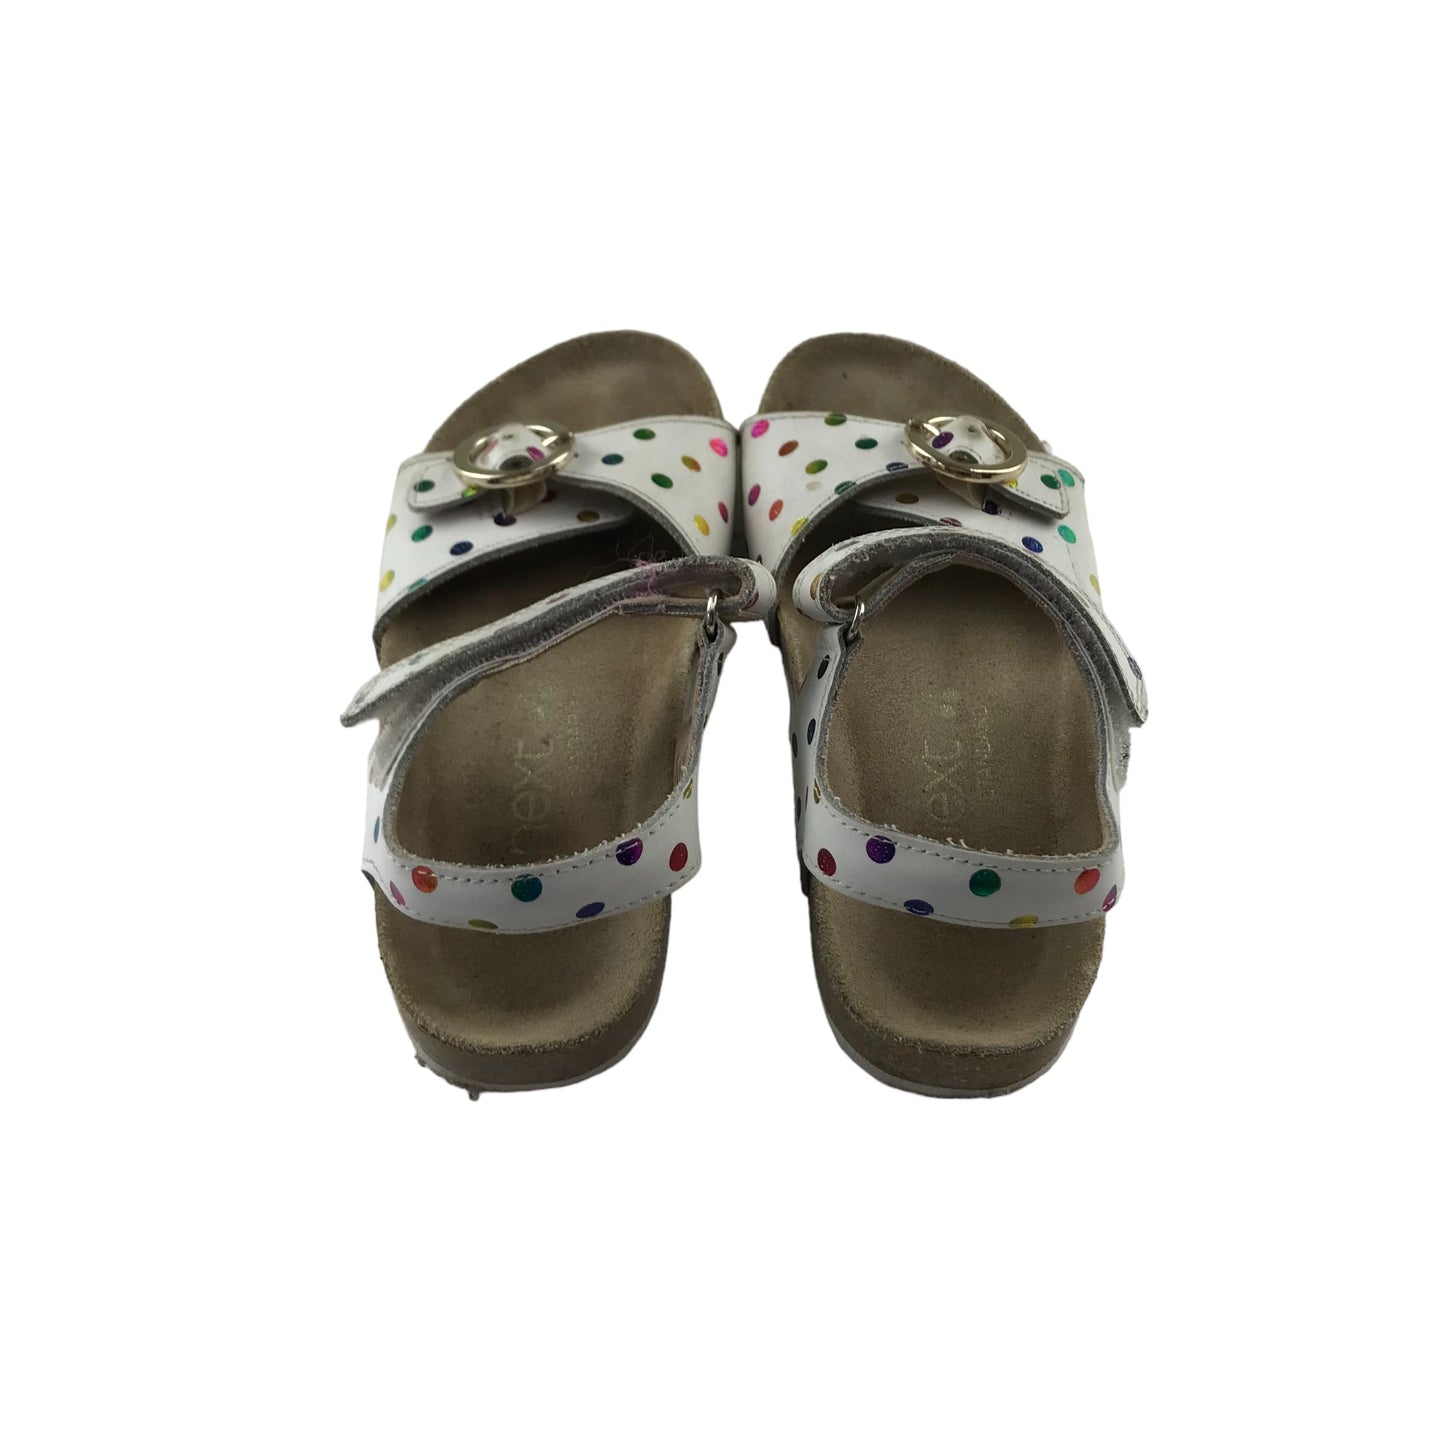 Next Sandals Shoe Size 11 Junior White with Multicoloured Polka Dots